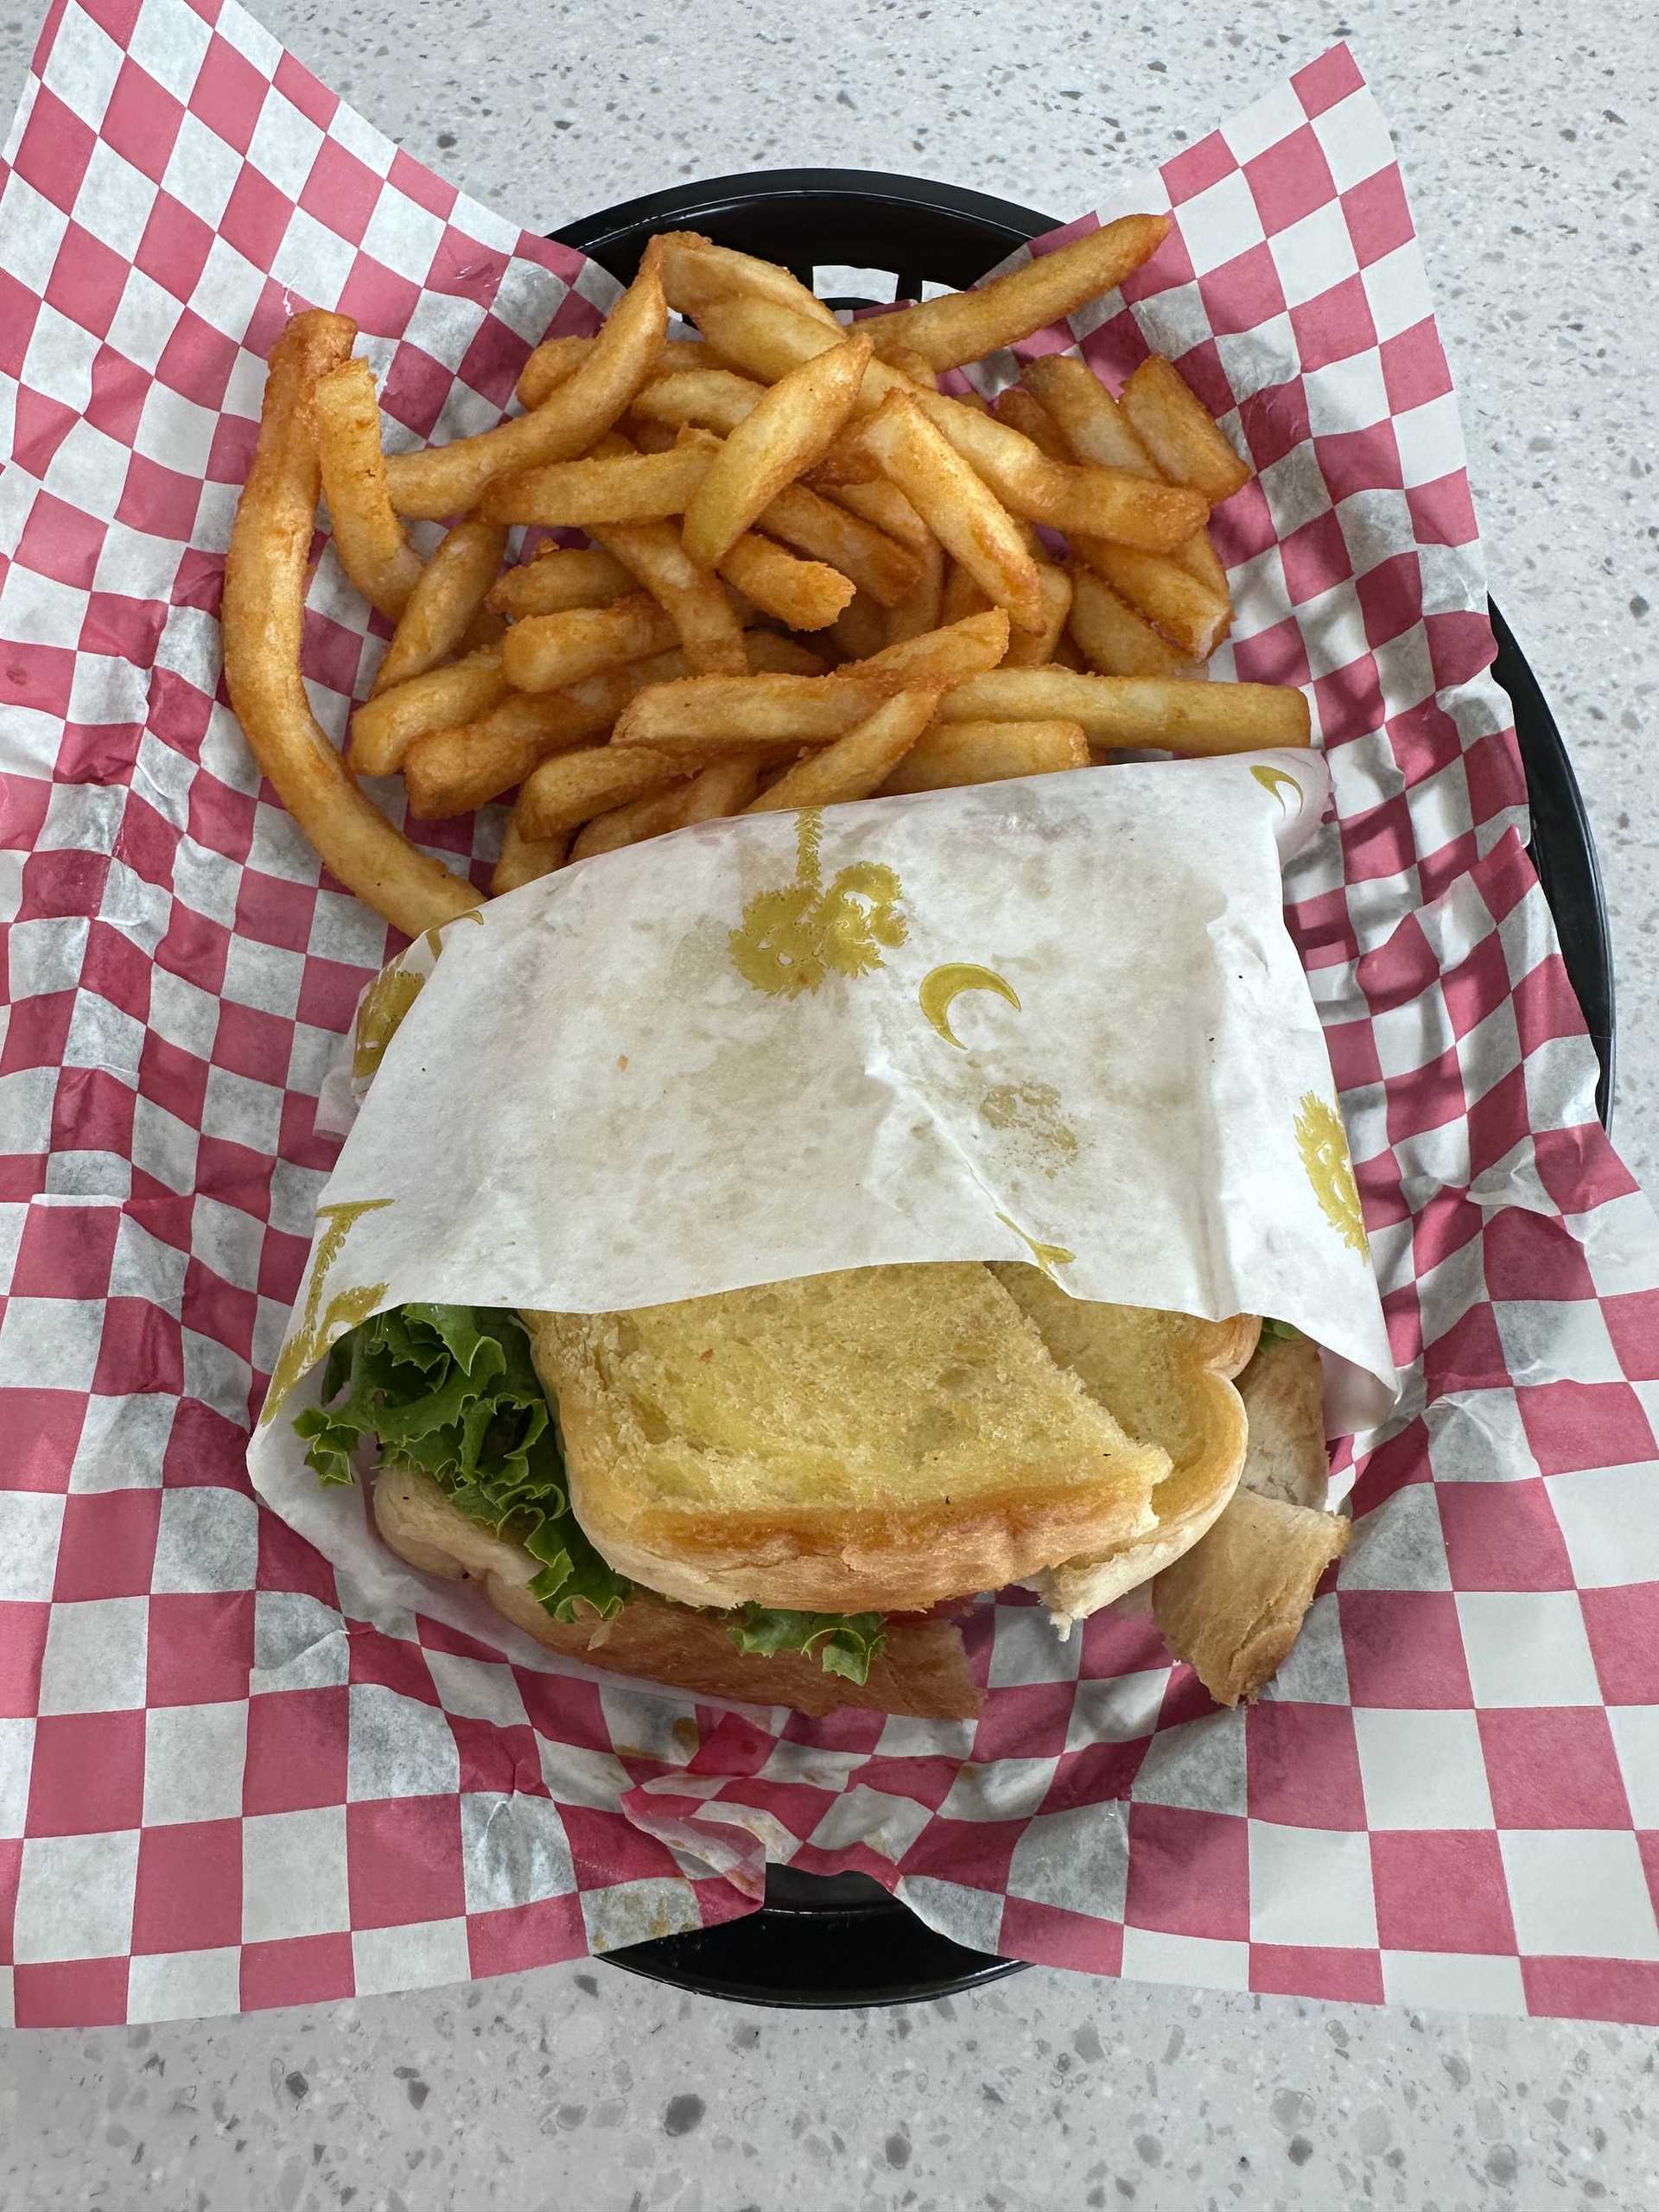 Grilled sandwich and crispy fries on red checkered paper in a basket.